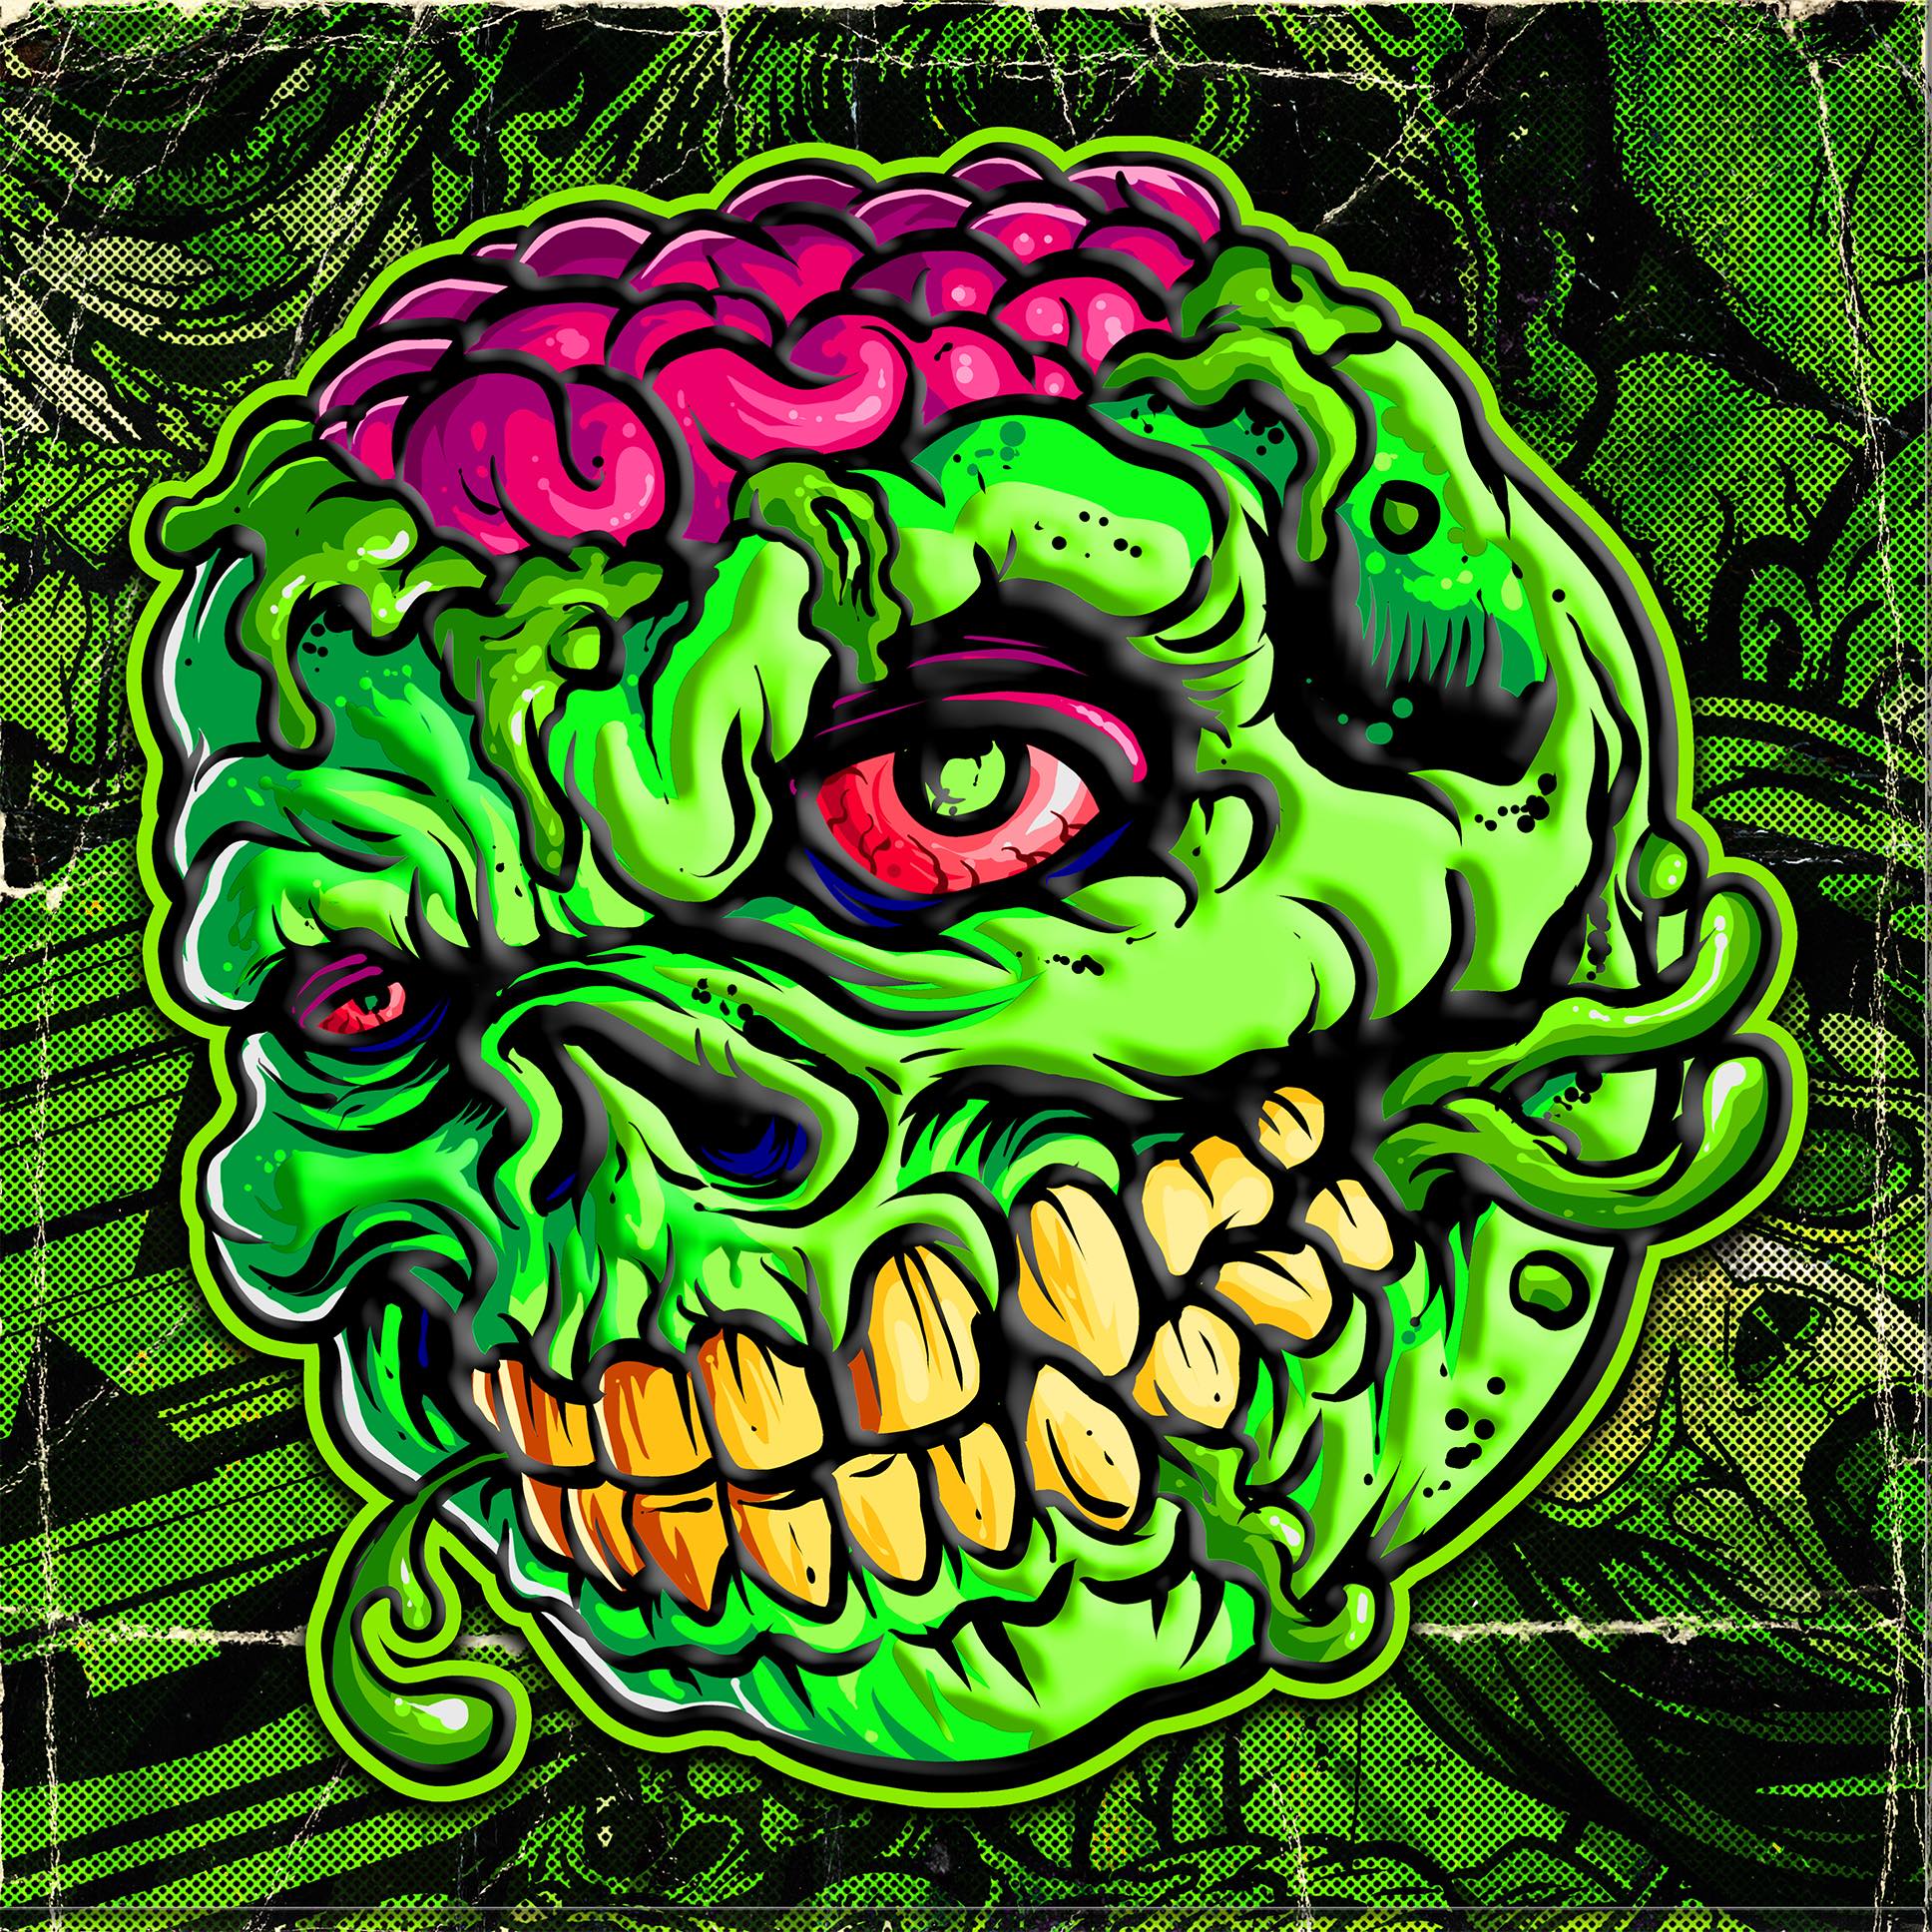 An illustration of a zombie head with a green head.